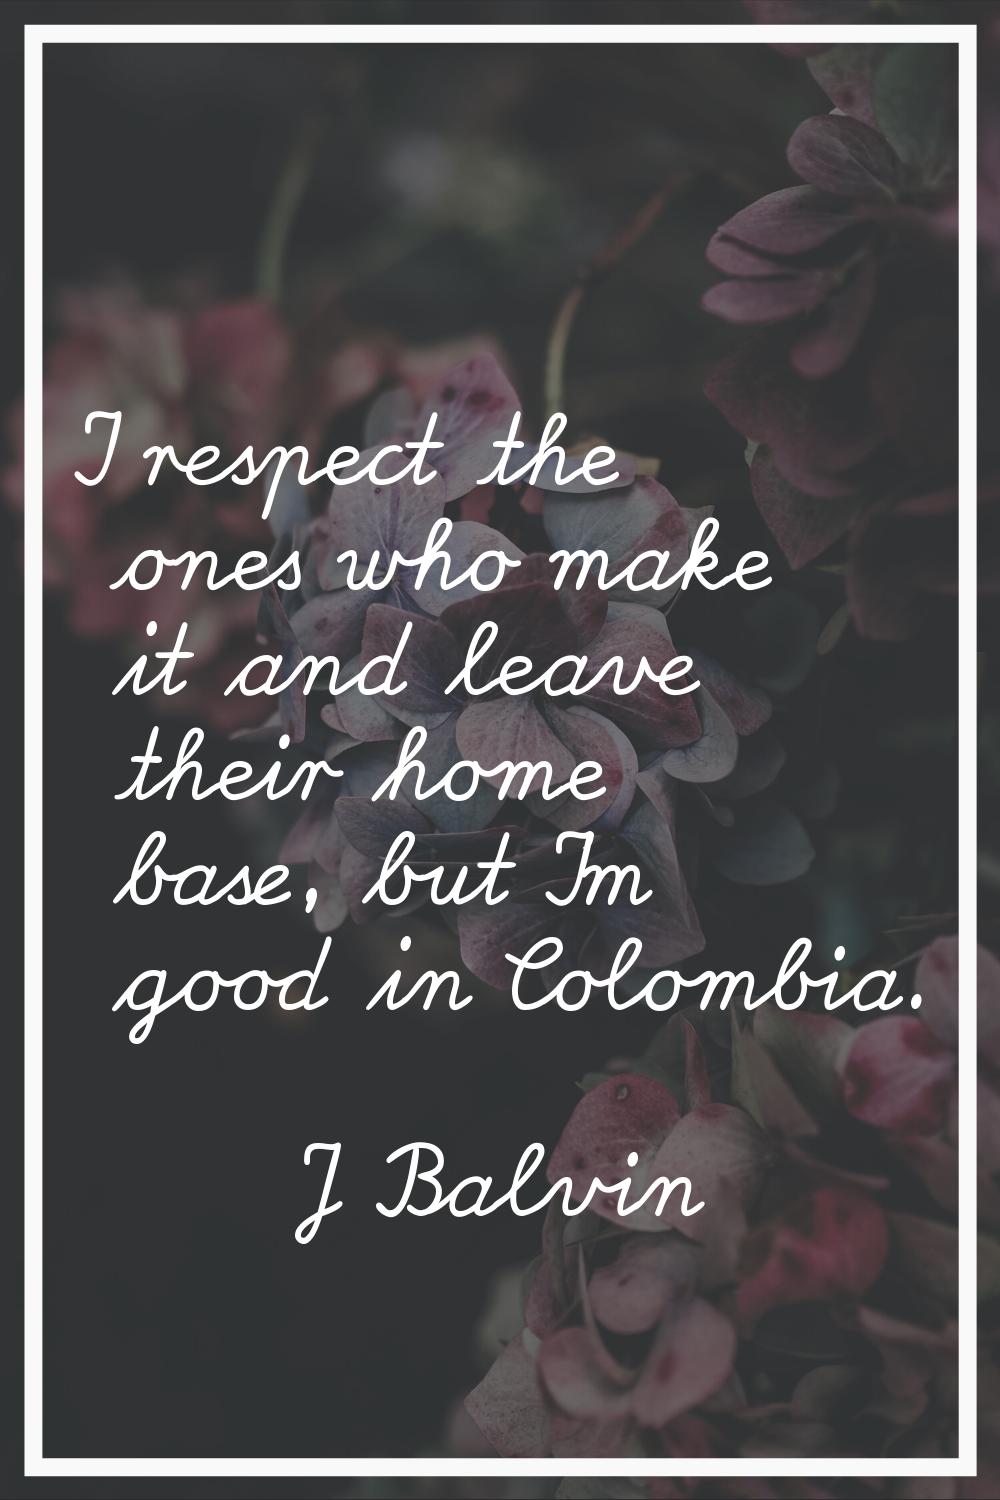 I respect the ones who make it and leave their home base, but I'm good in Colombia.